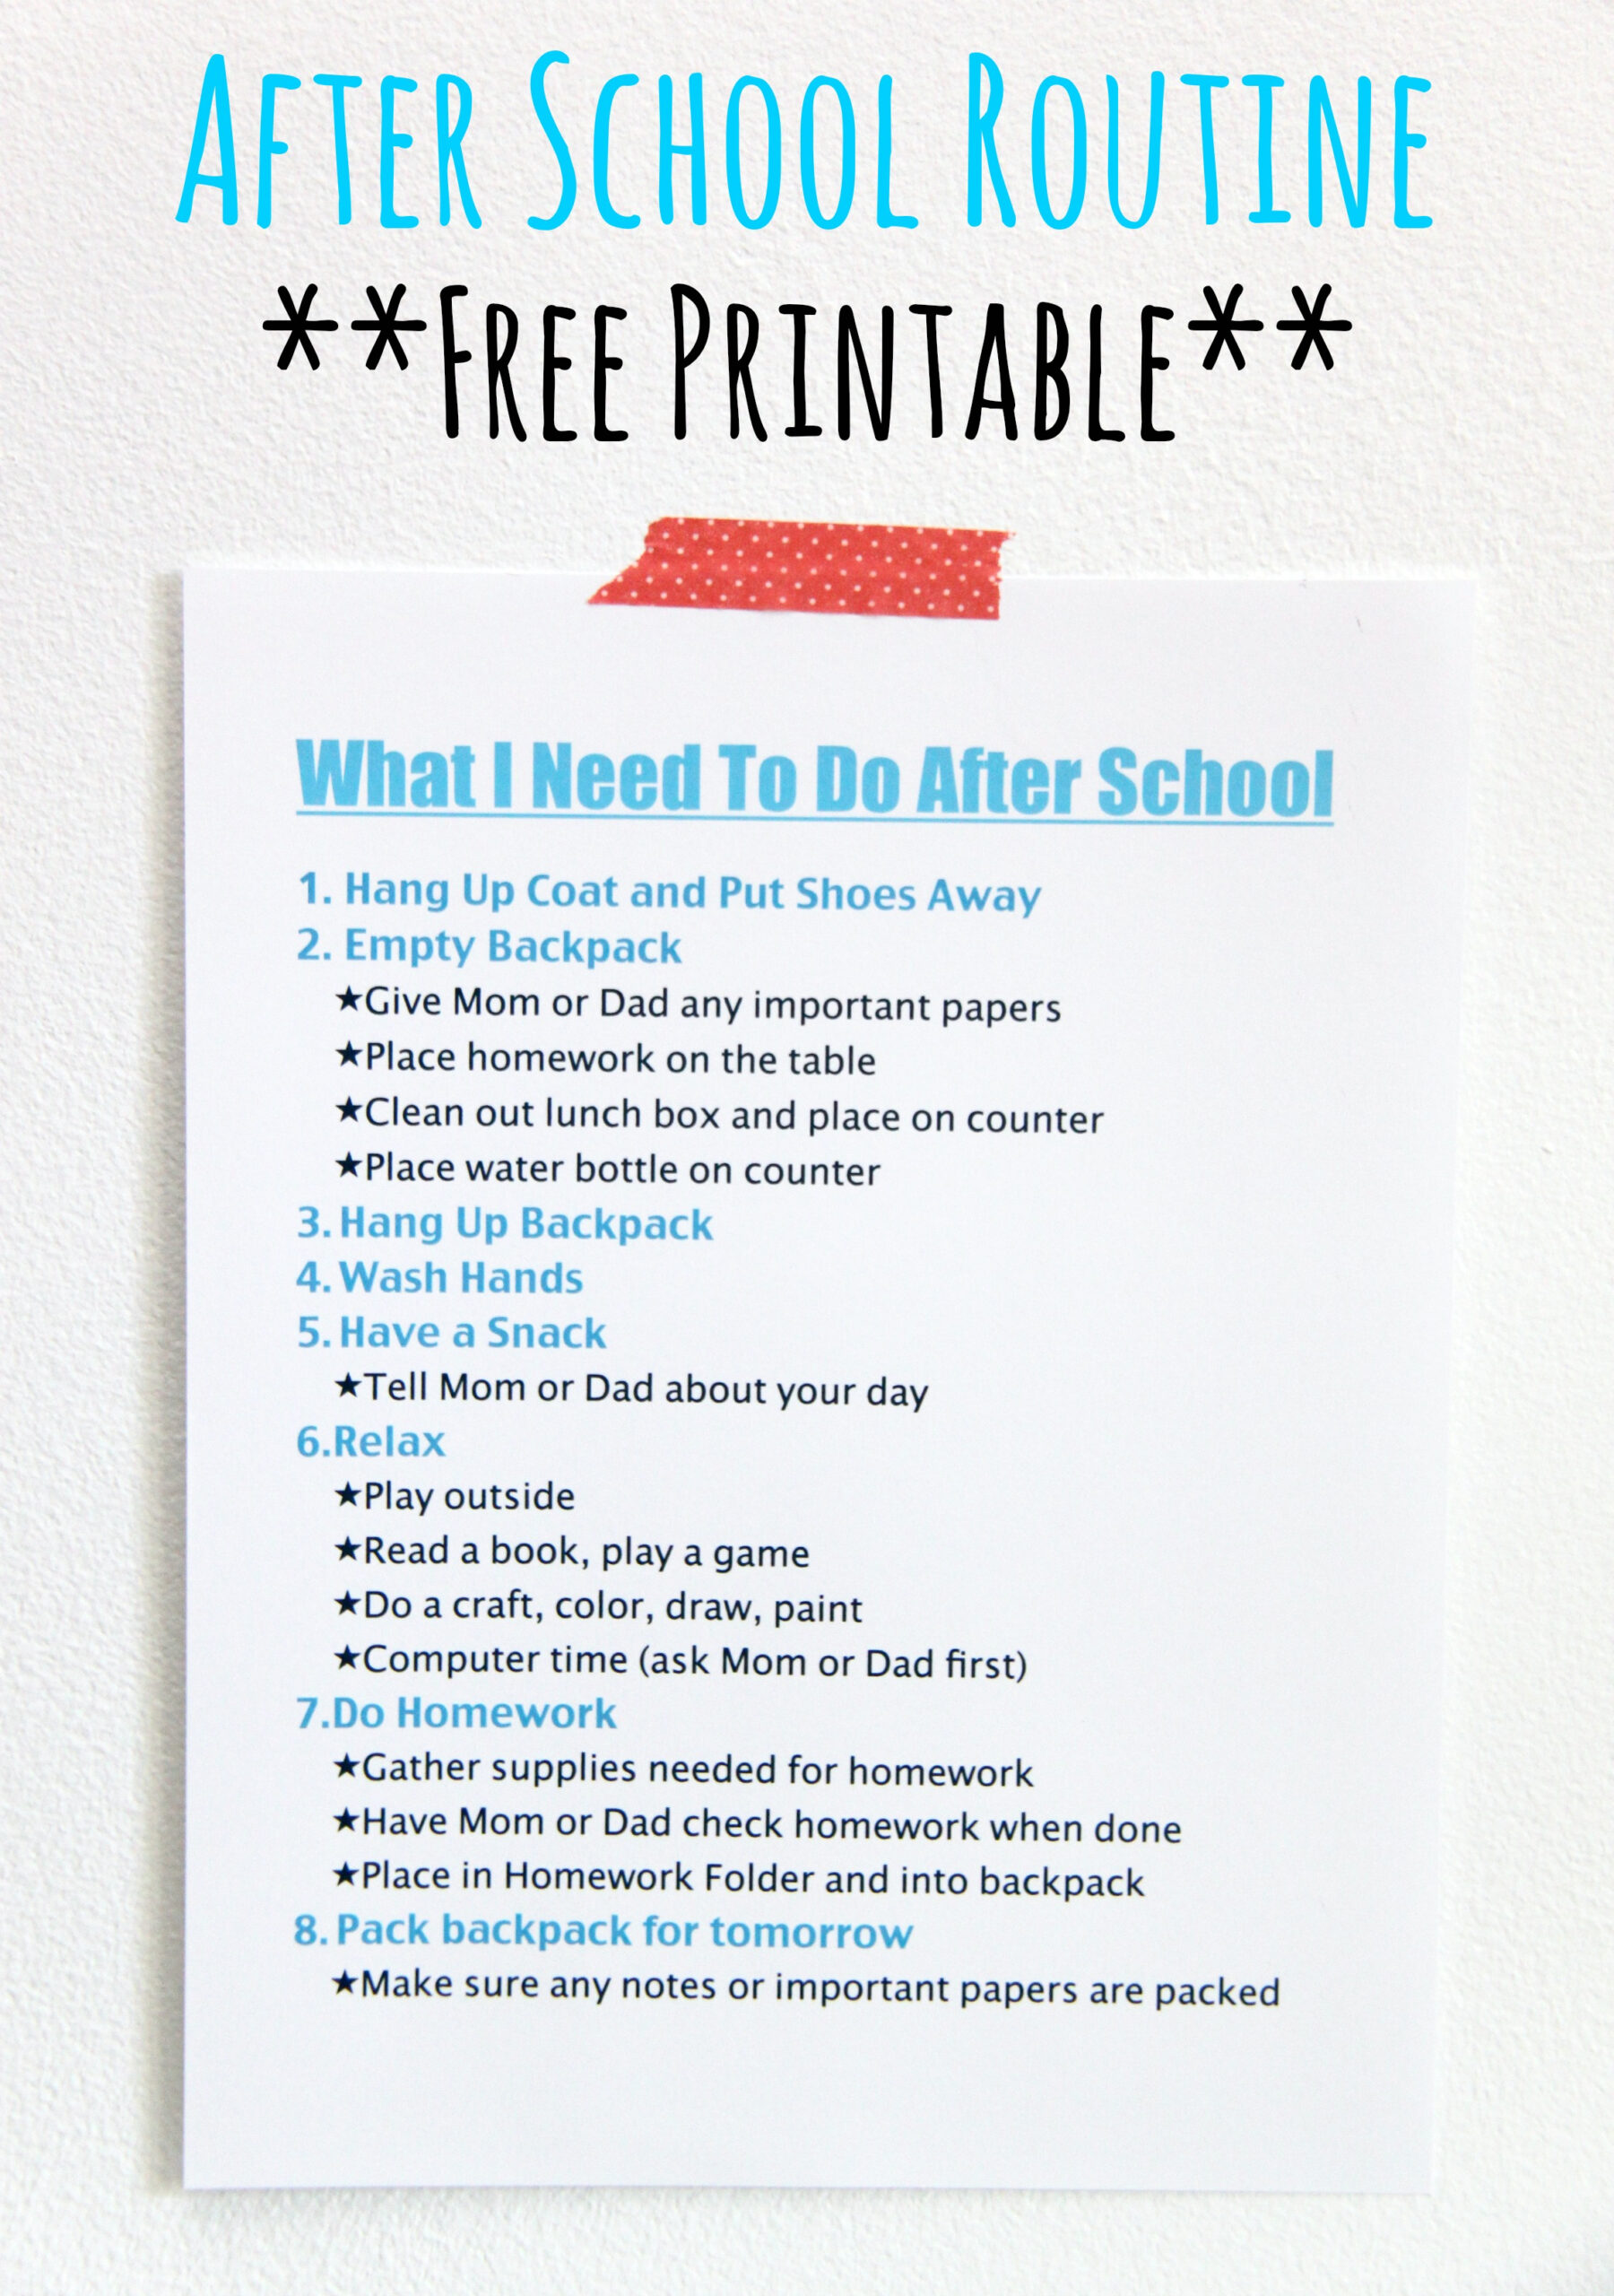 After School Routine FREE Printable